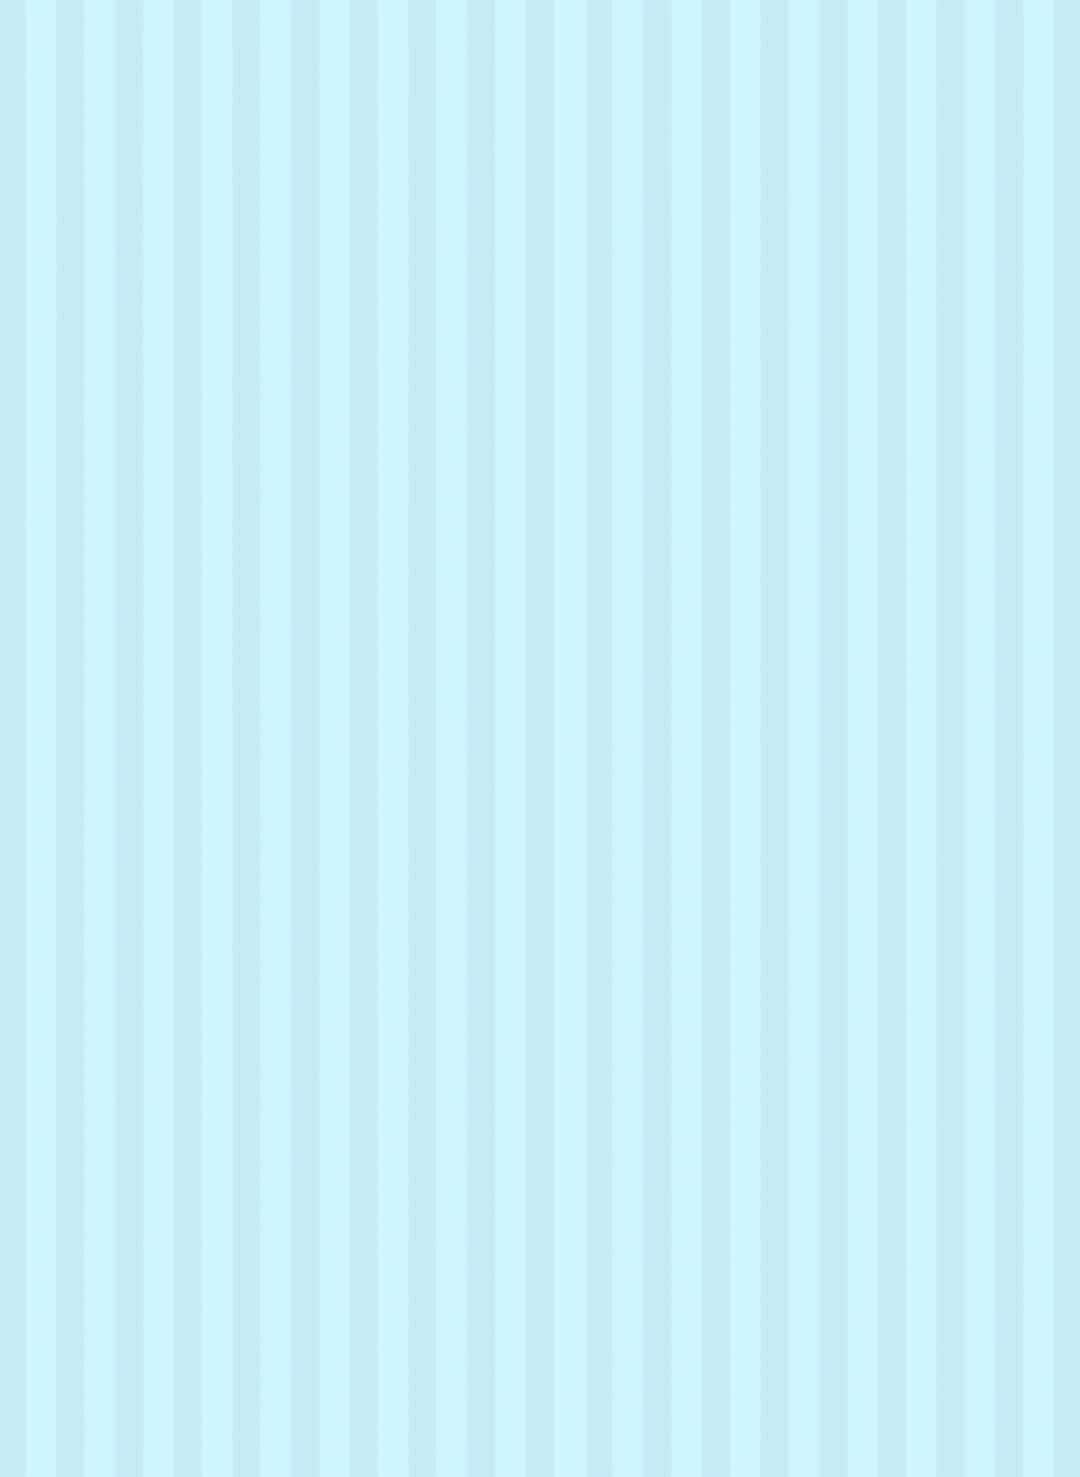 A Light Blue Striped Background With White Stripes Wallpaper